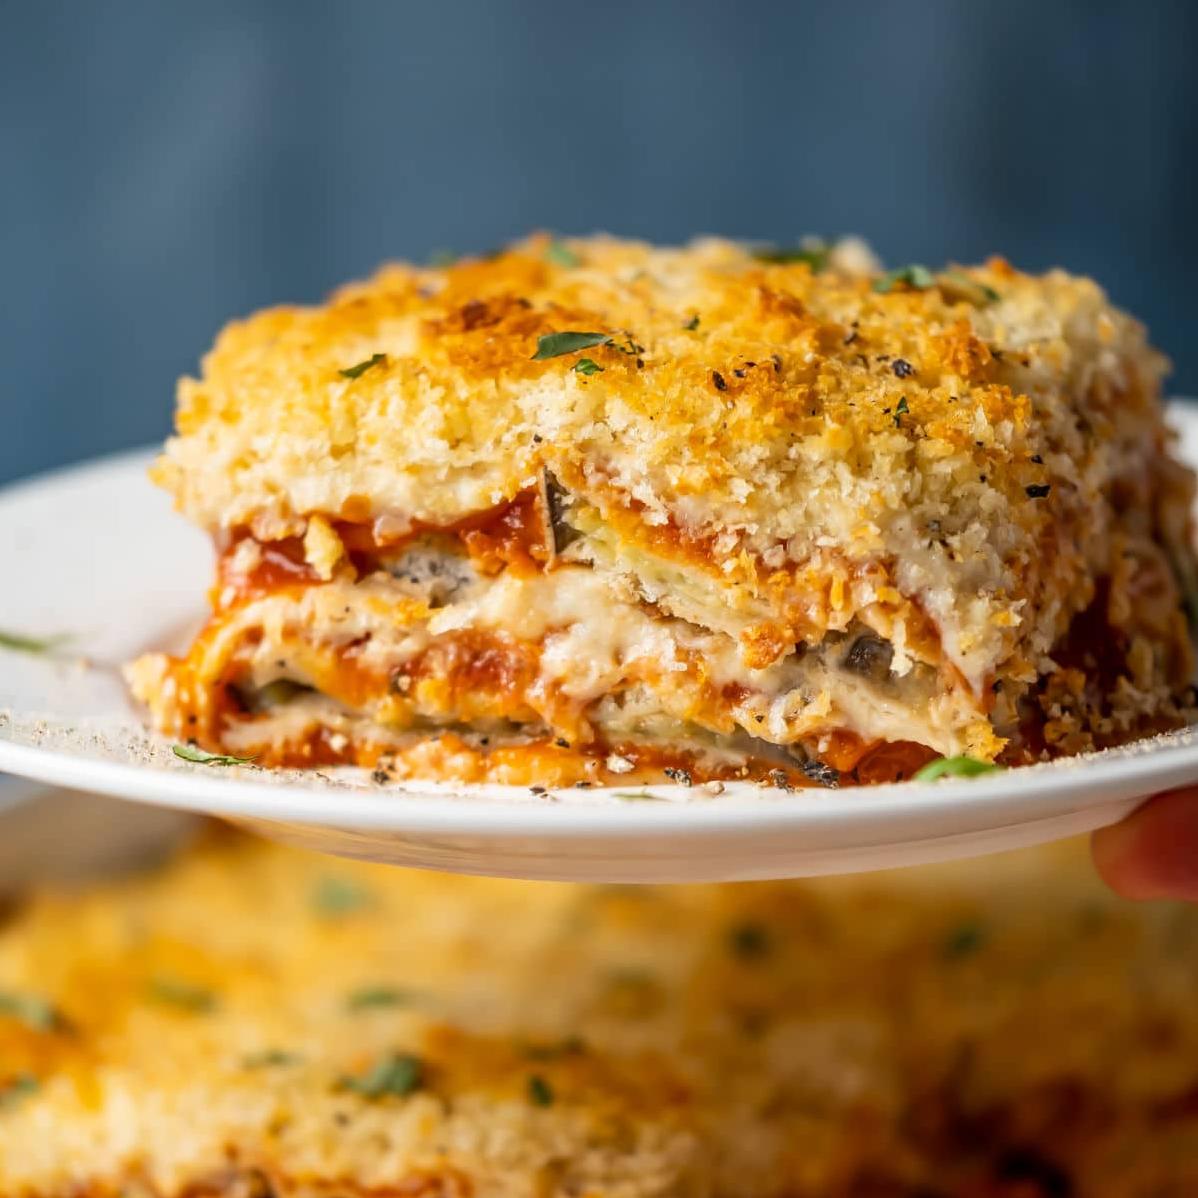  Get ready for a mouth-watering explosion of flavors with this cheesy Vegan Eggplant Parmigiana!